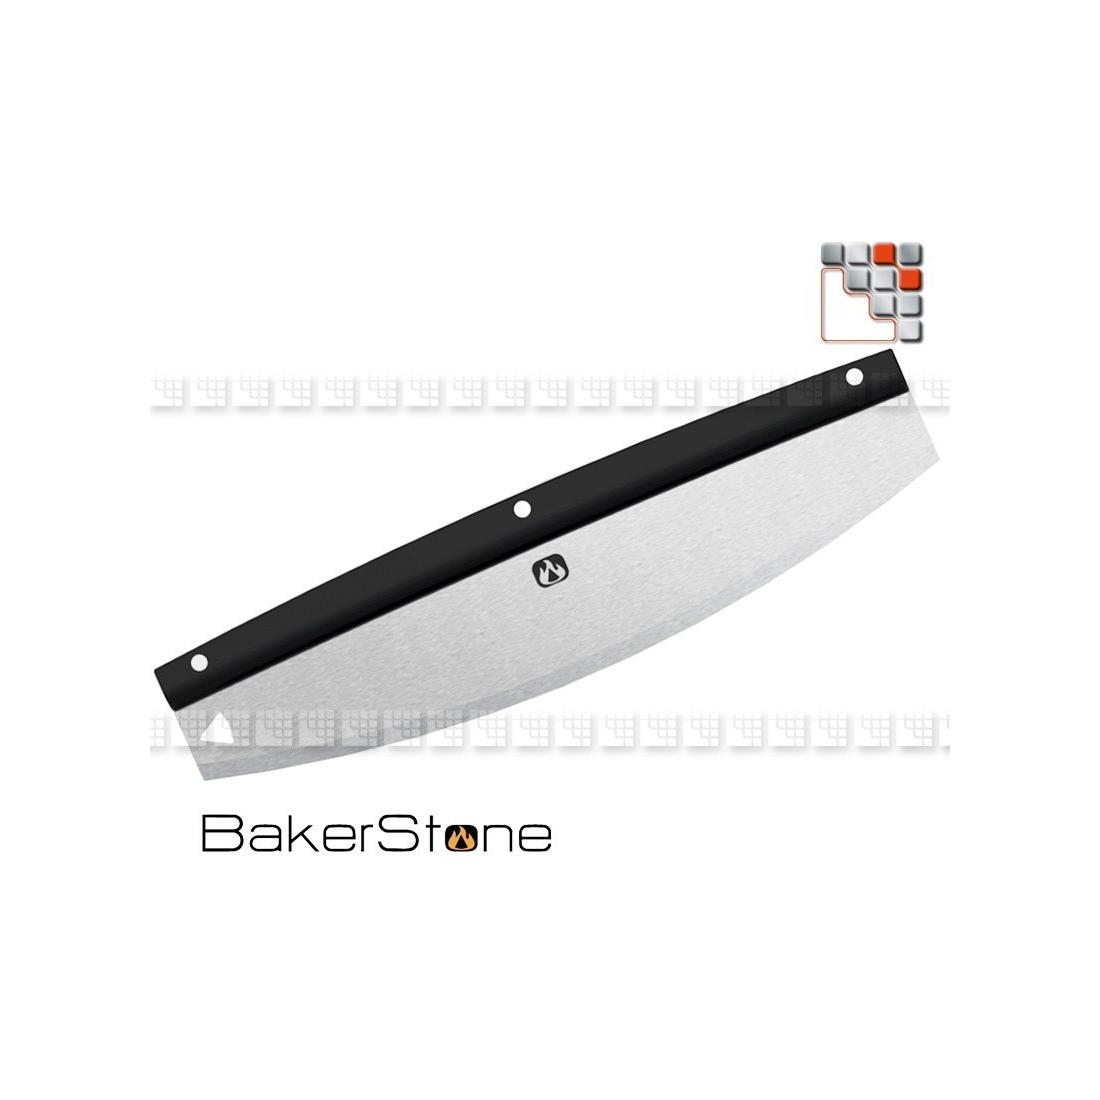 Large Pizza Cutter A17-69200 BakerStone® Special Pizza Utensils